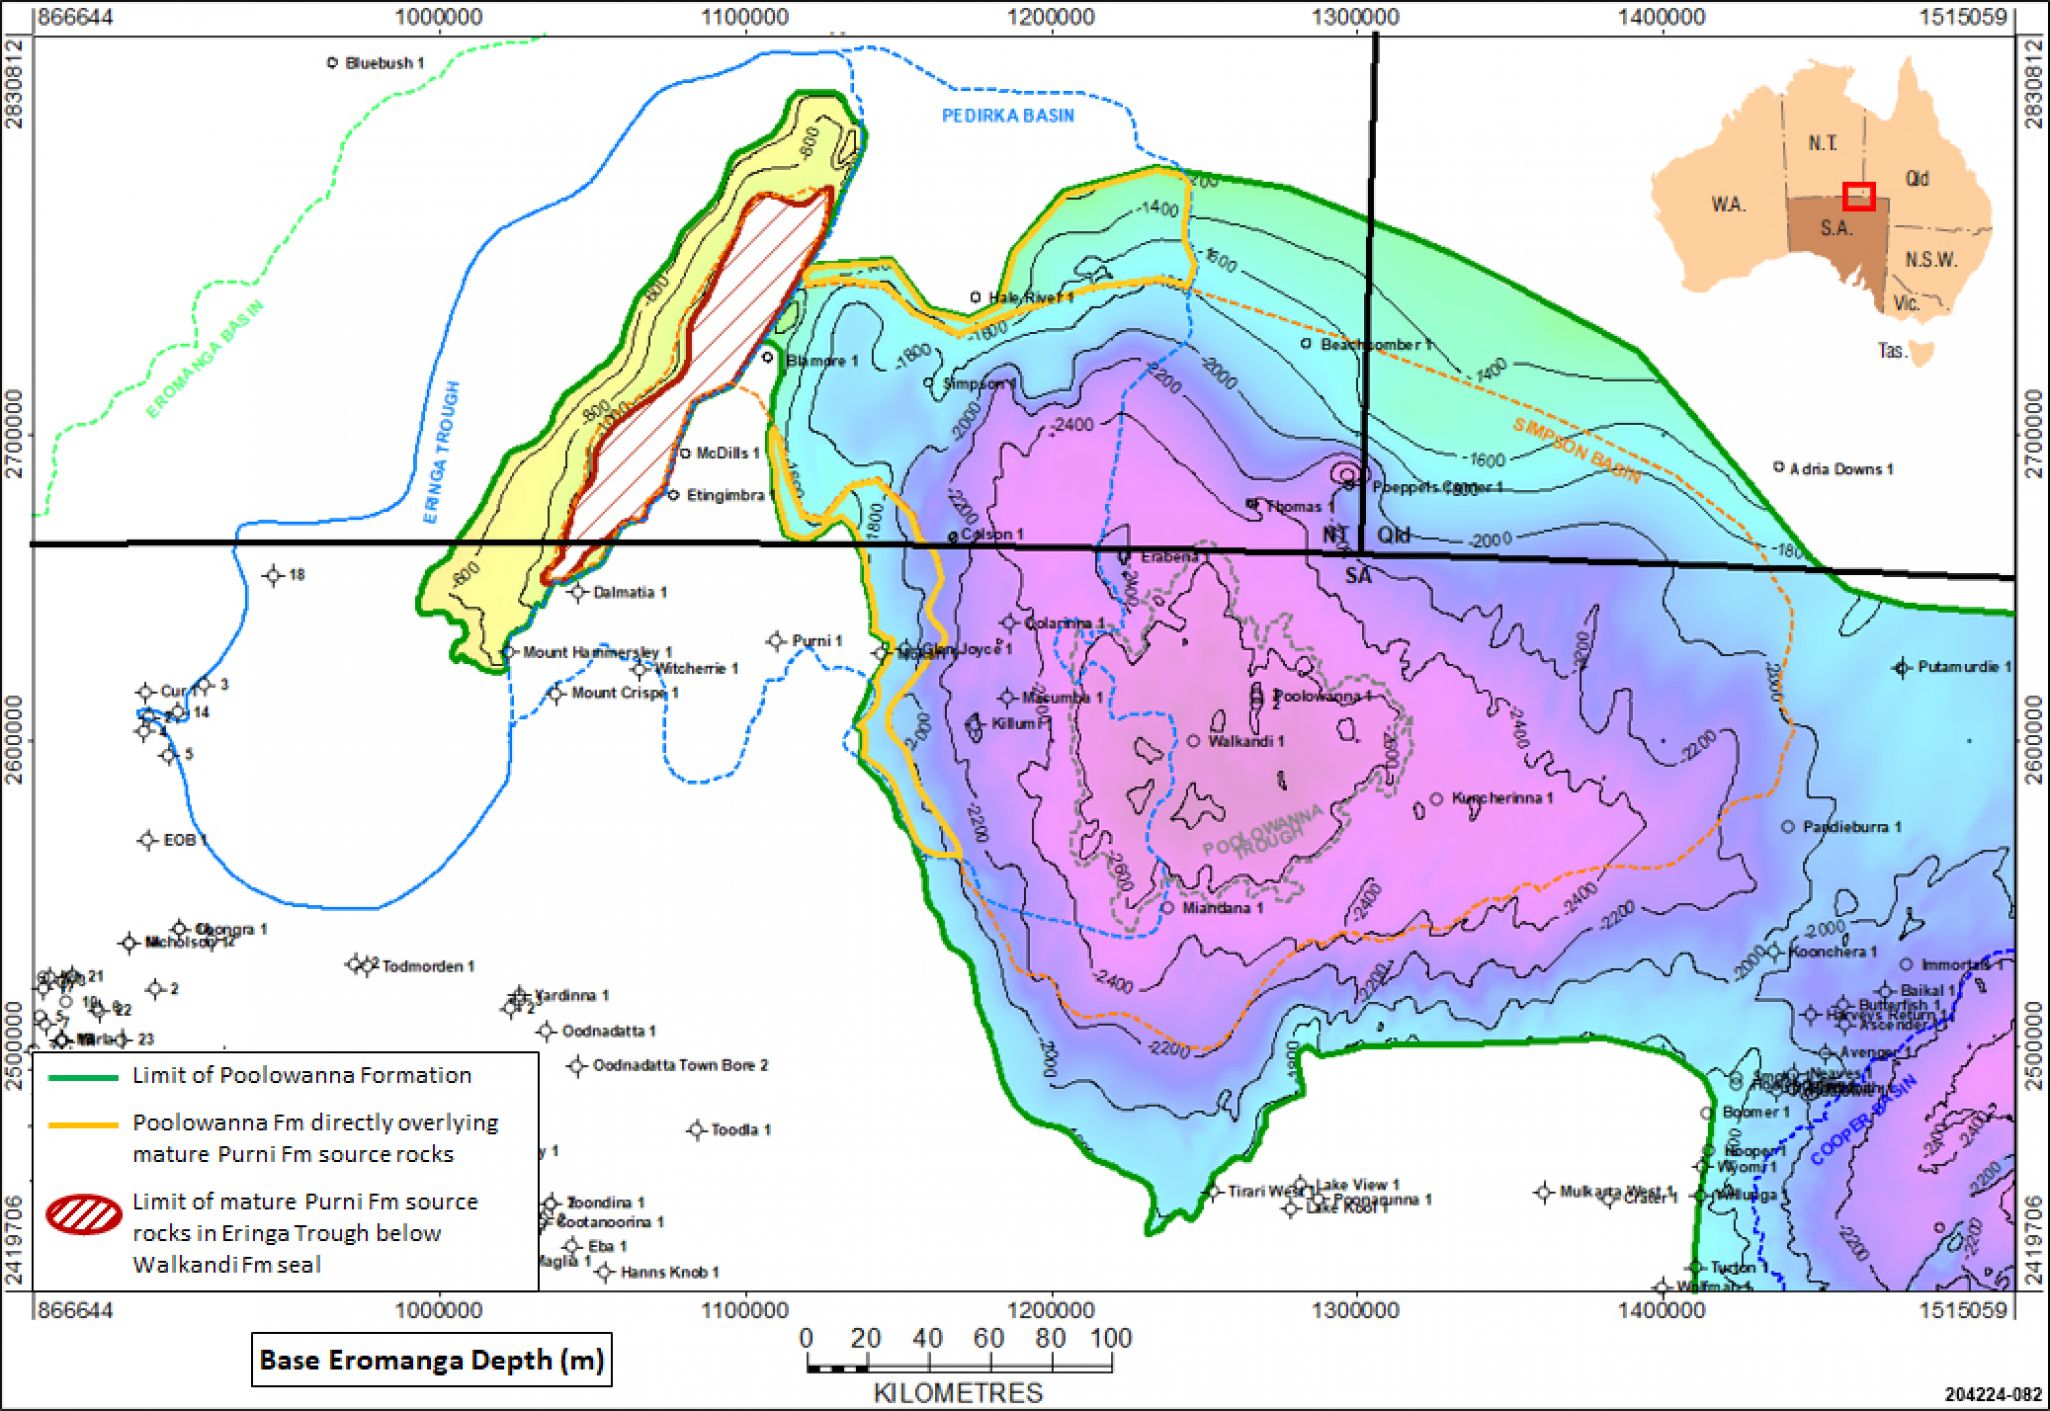 Extent of Poolowanna Formation directly overlying mature Purni Formation in the Pedirka Basin